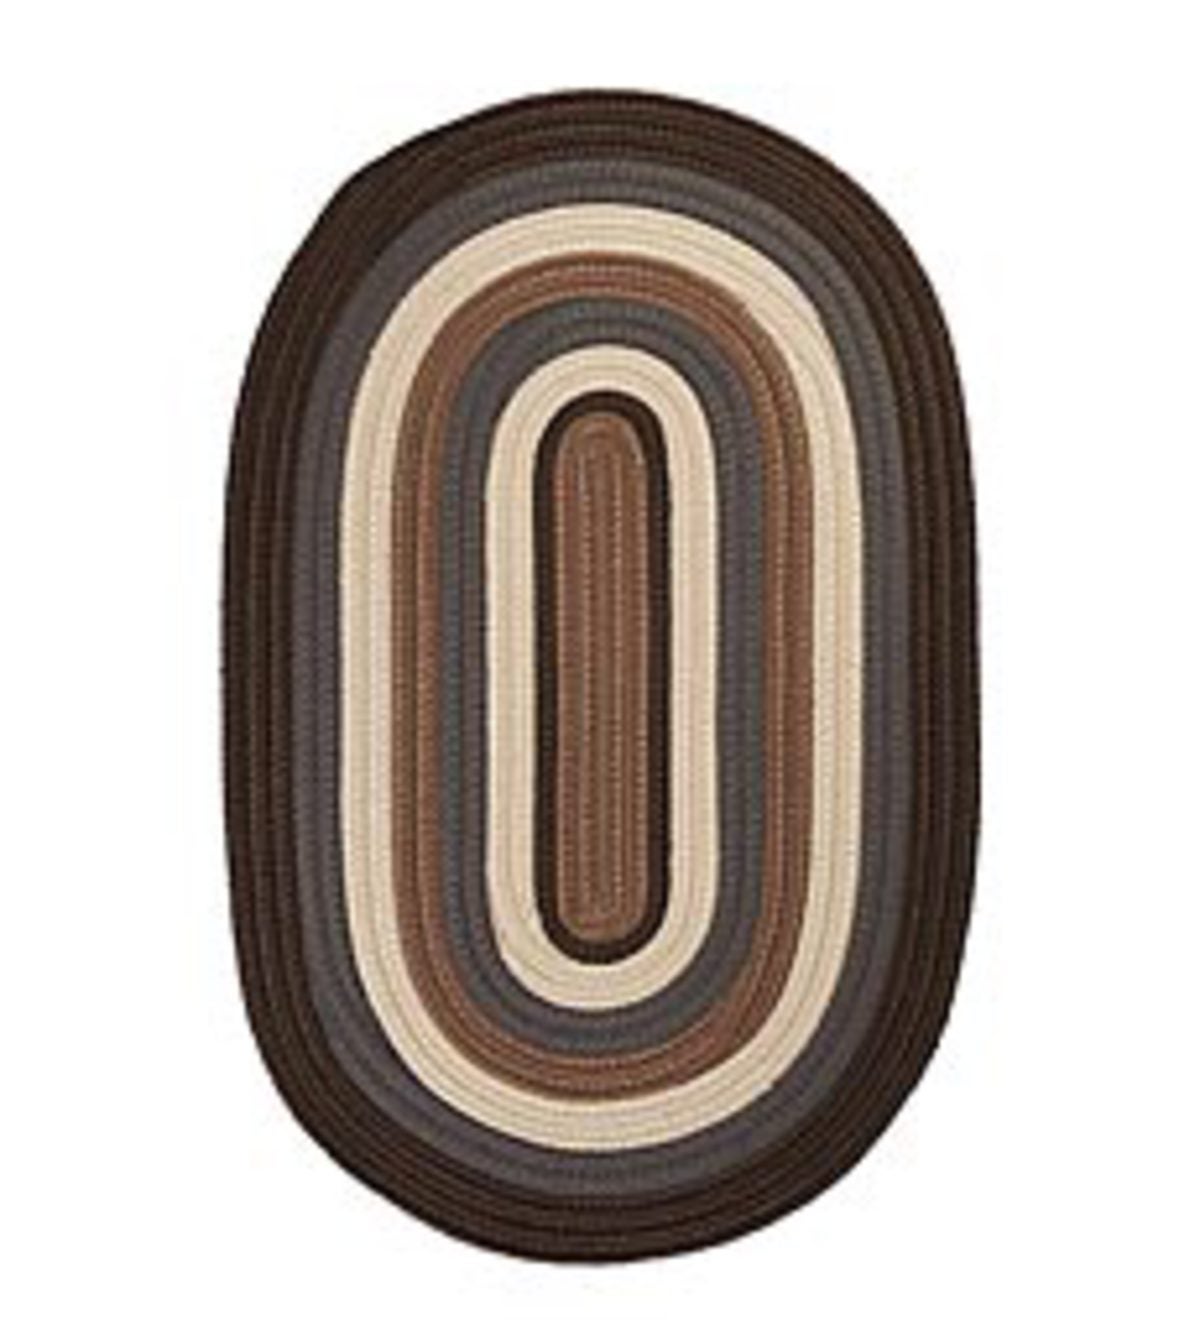 4' x 6' Banded Braided Indoor/Outdoor Rug - Brown